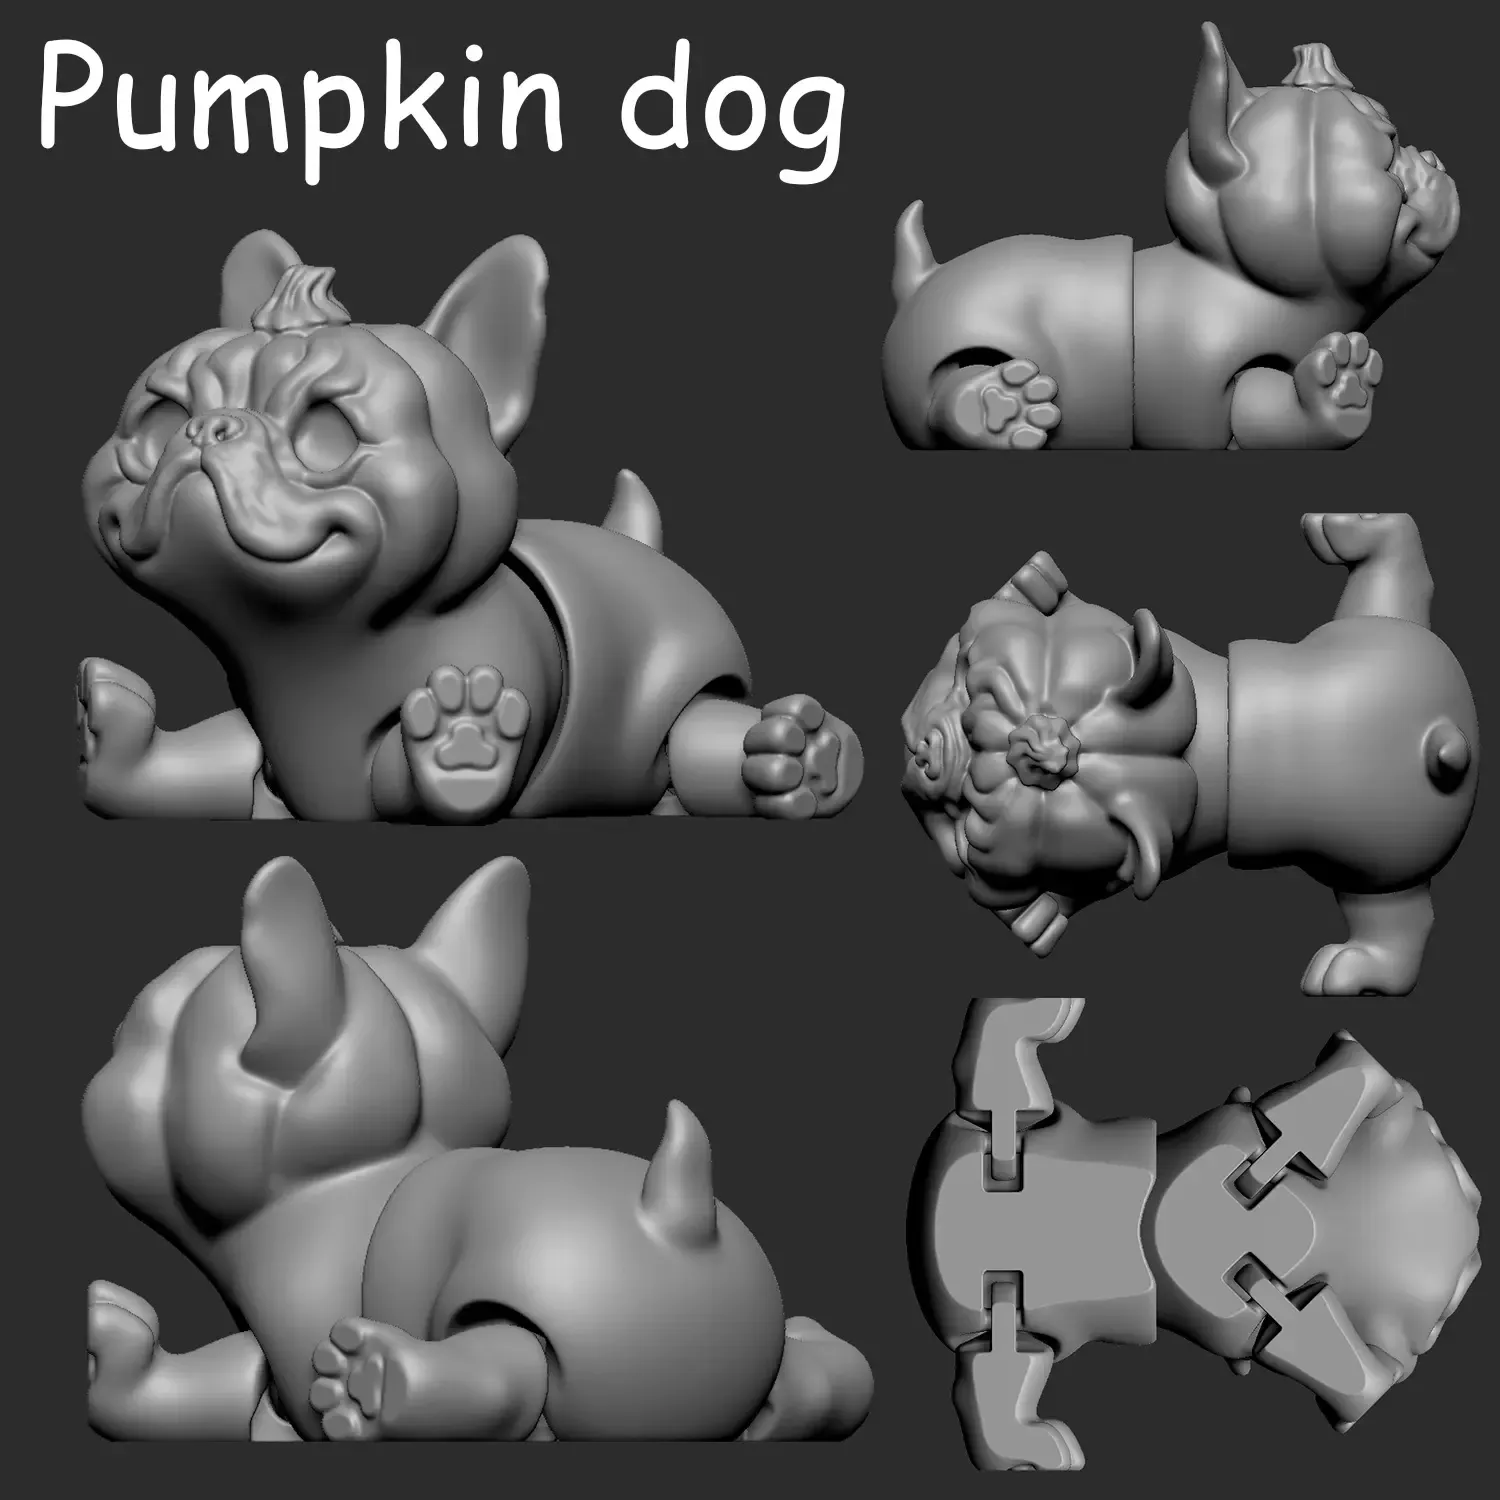 Pumpkin headed dog - print in place fantastic toy